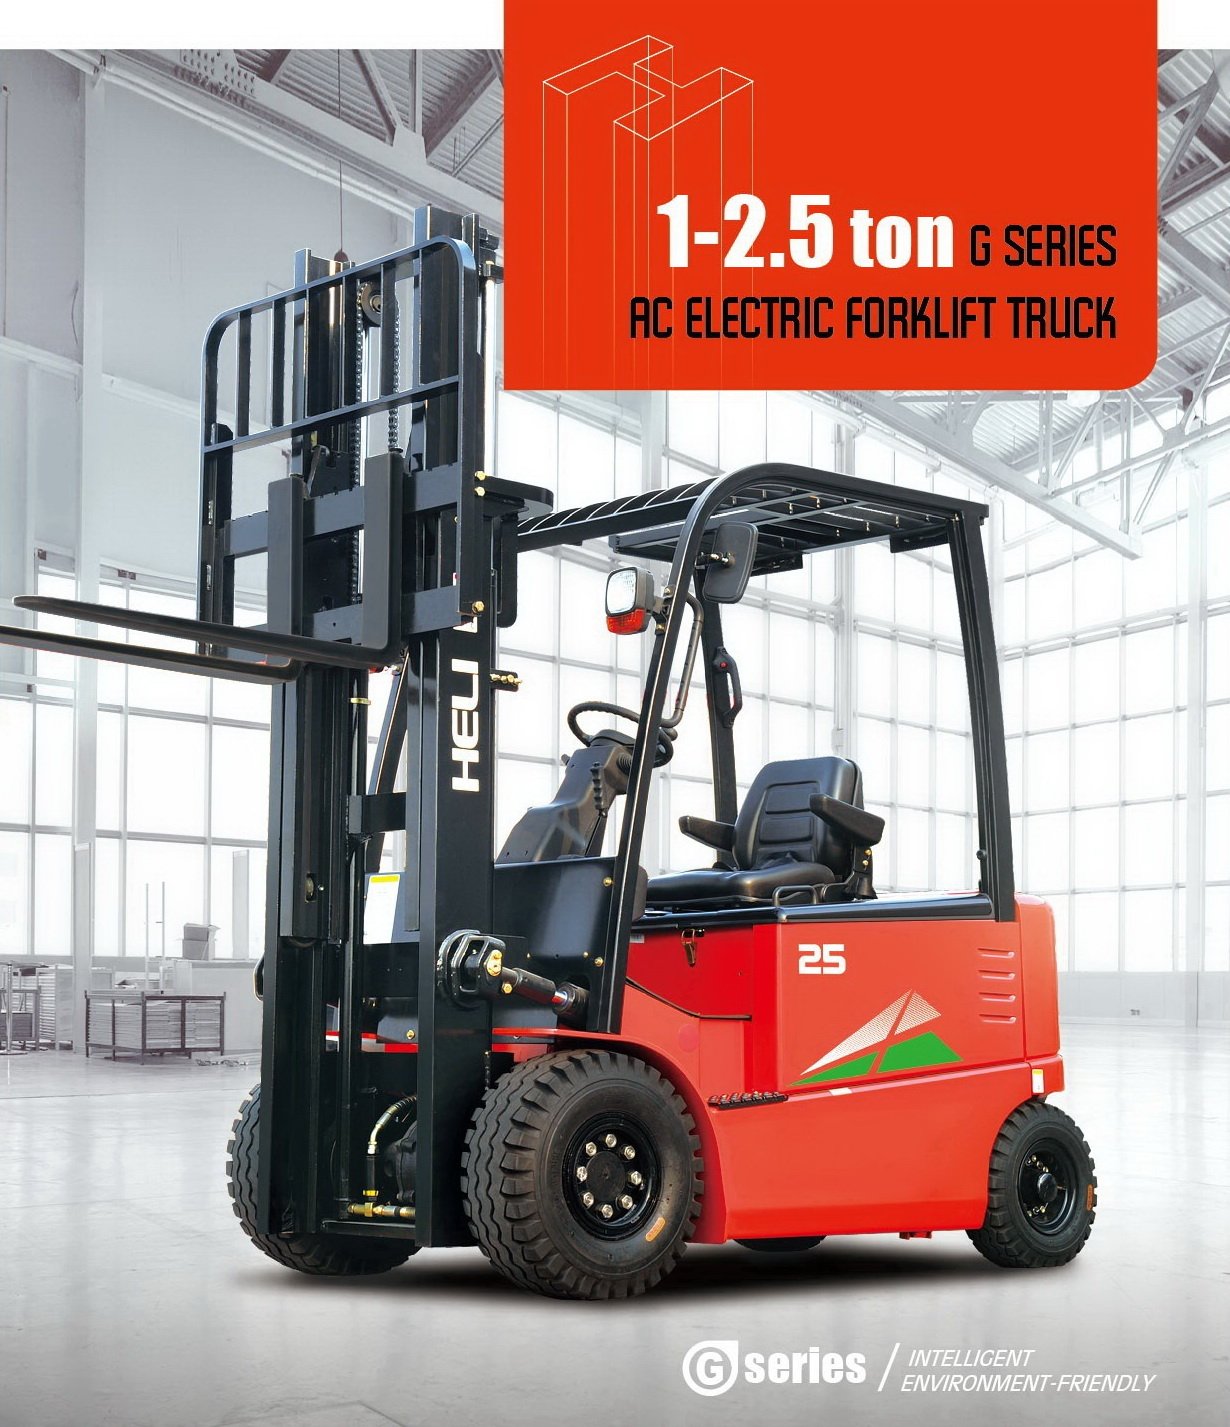 1-2.5 ton G SERIES AC ELECTRIC FORKLIFT TRUCK